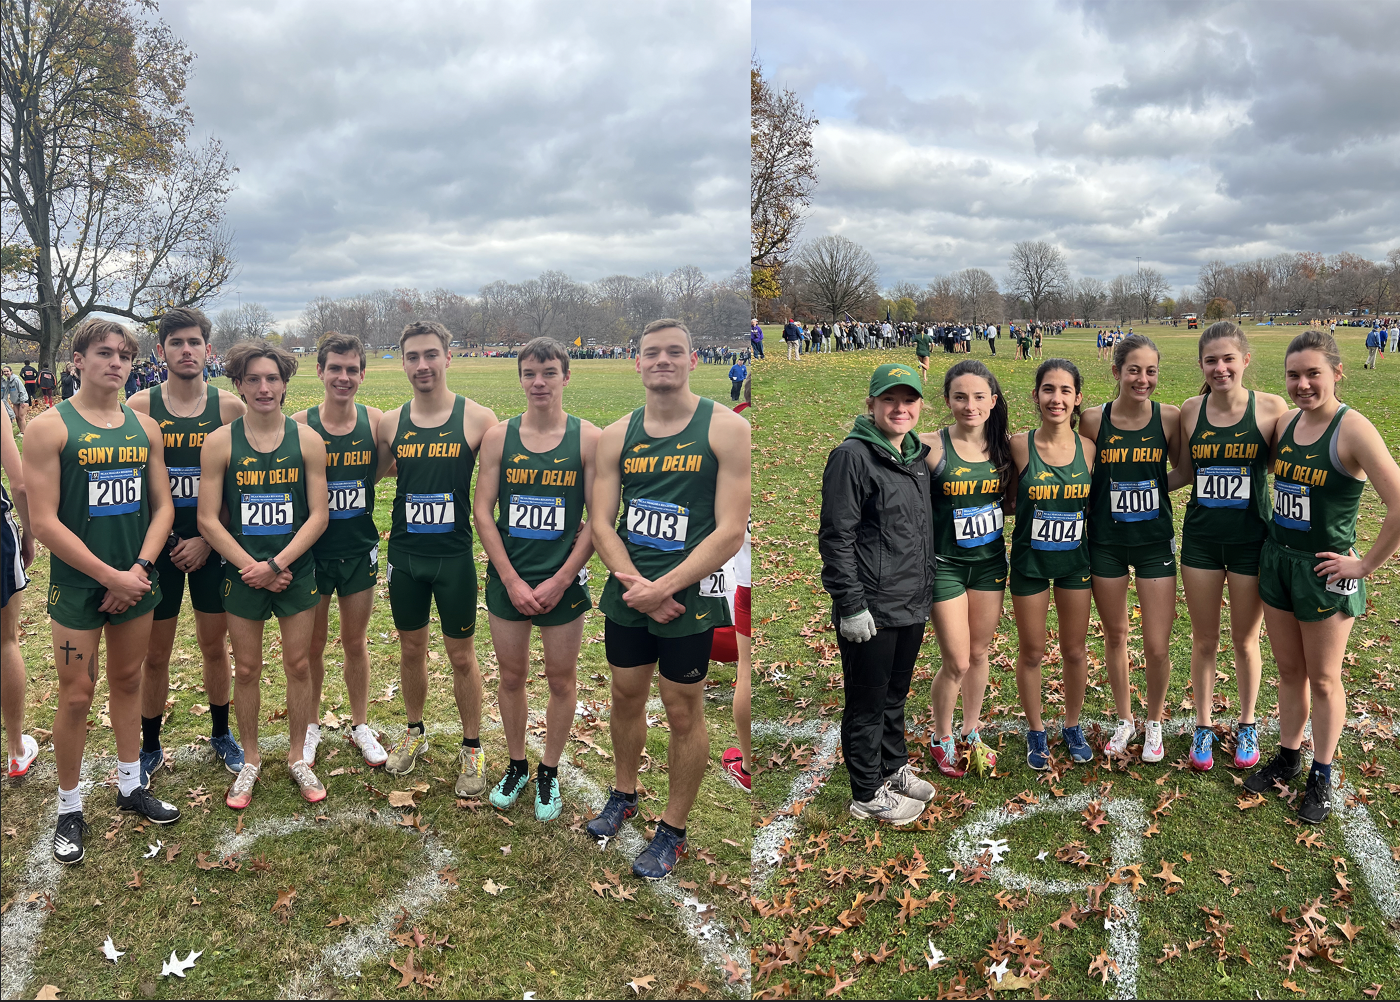 Men Place 12th and Women in 14th at NCAA Niagra Regionals